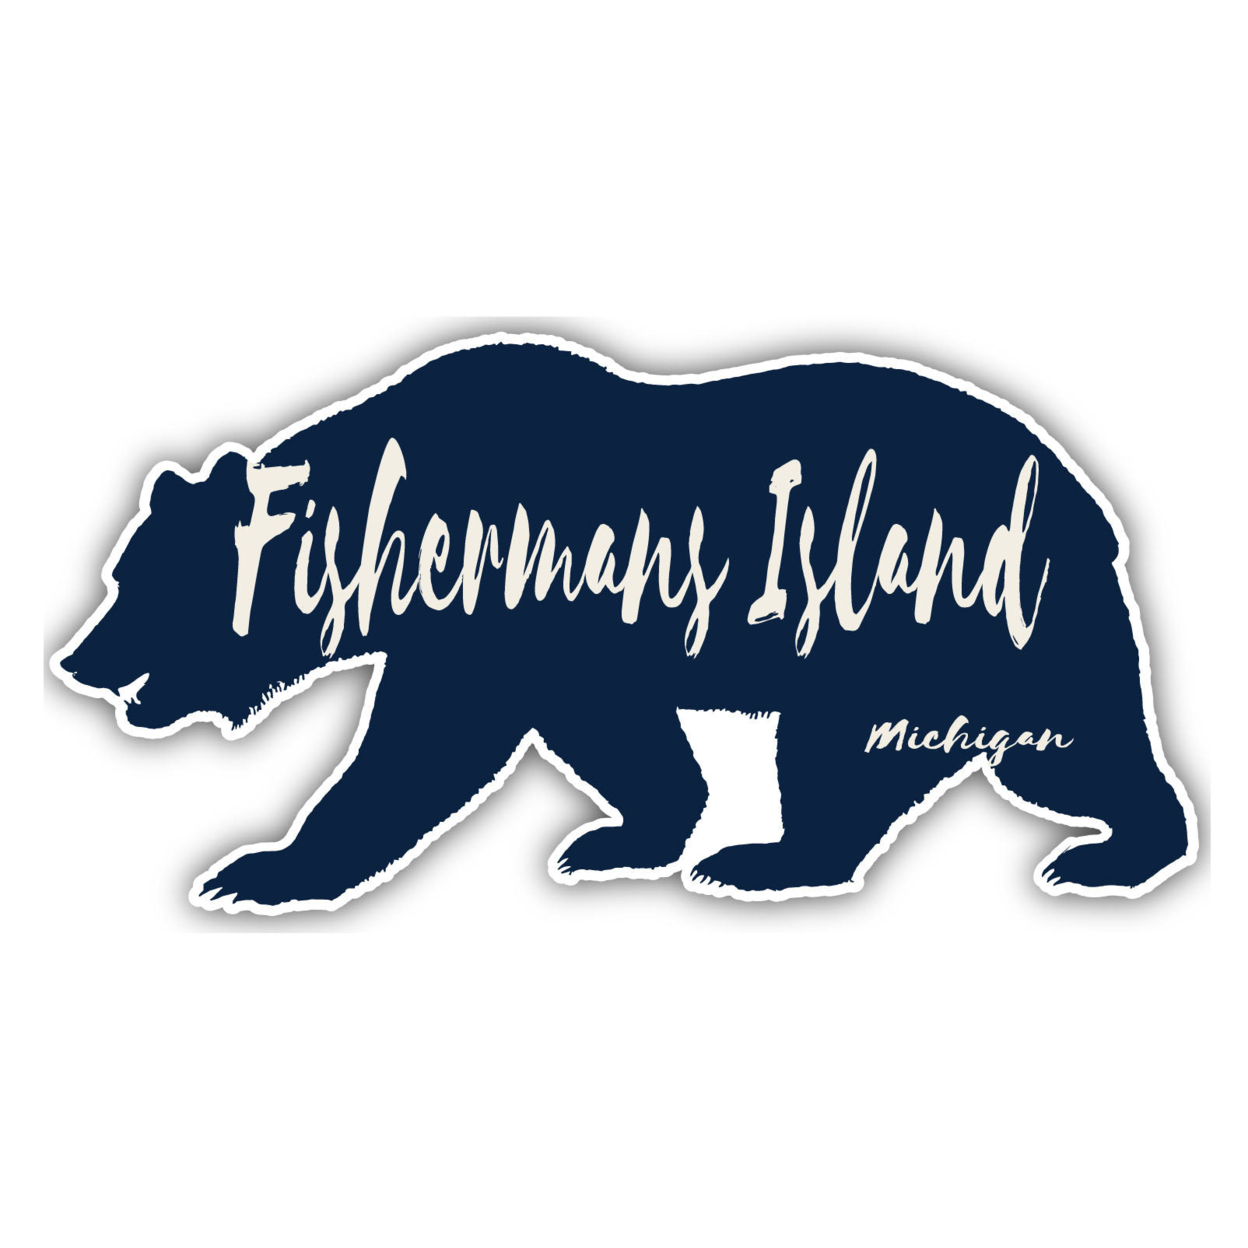 Fishermans Island Michigan Souvenir Decorative Stickers (Choose Theme And Size) - 4-Pack, 4-Inch, Bear